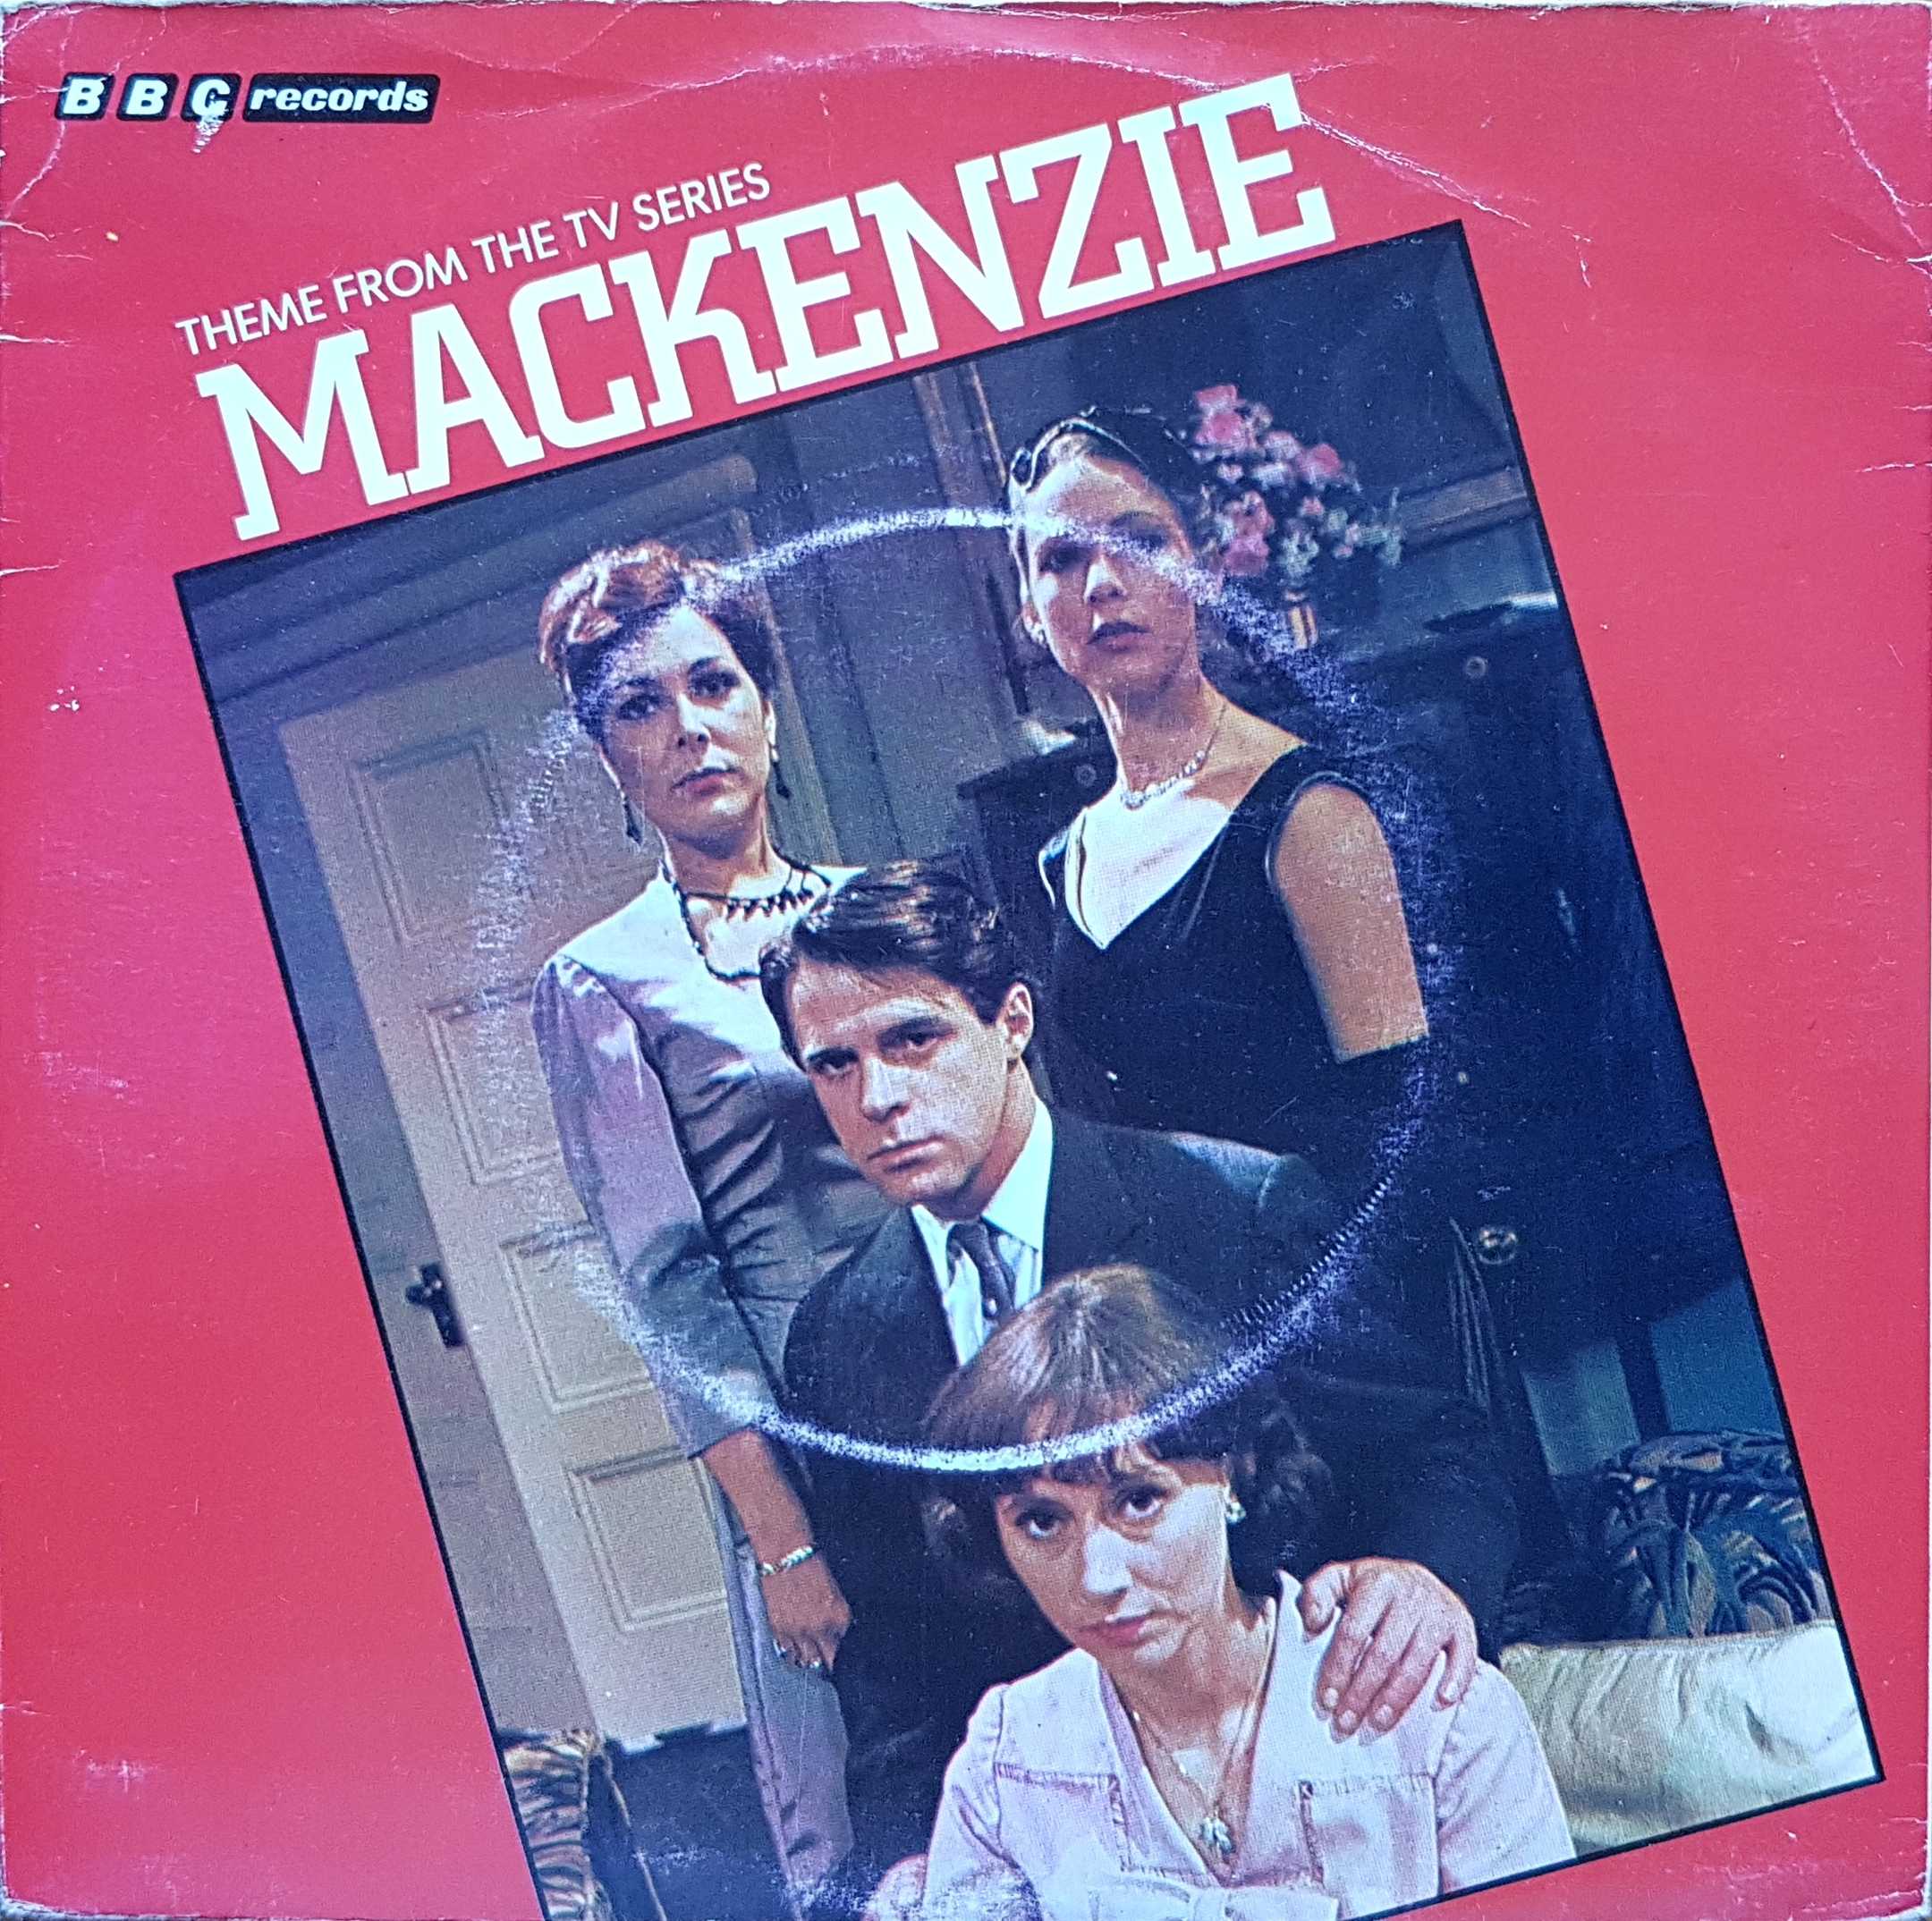 Picture of RESL 82 Mackenzie by artist Anthony Isaac from the BBC records and Tapes library